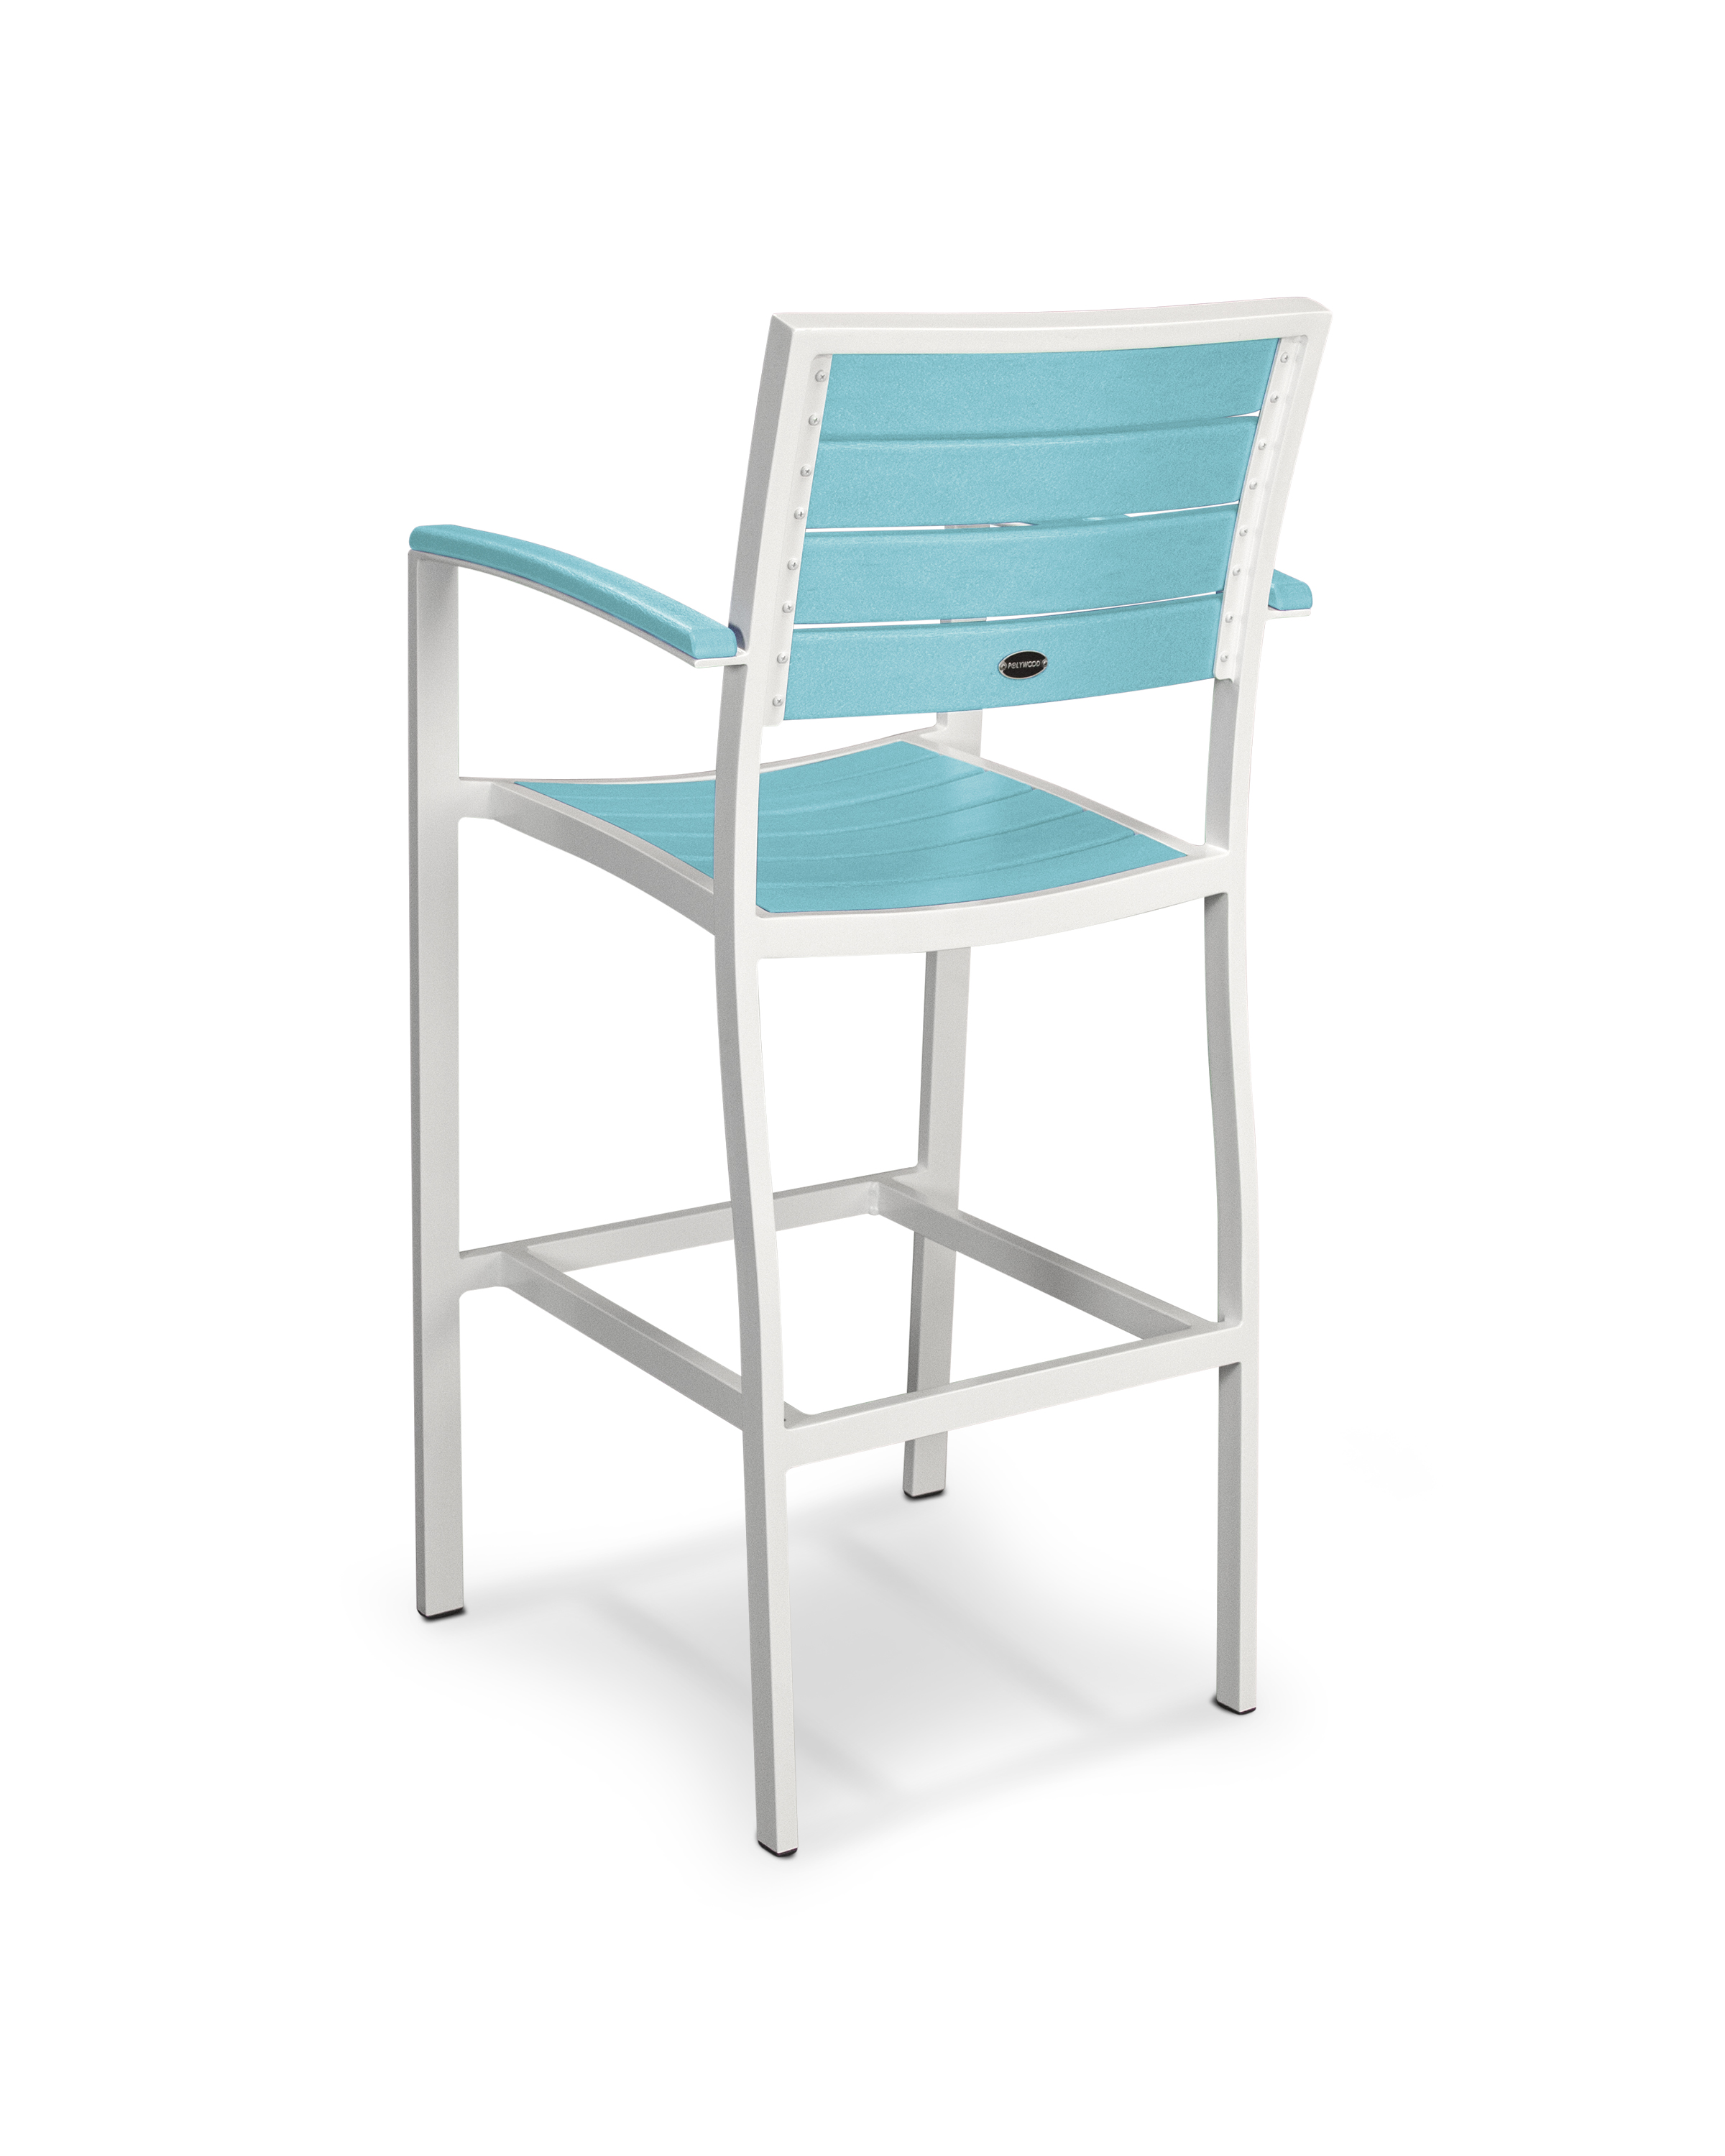 Transform Your Outdoor Entertaining Area Into A Five-star Luxury Resort With This Sleek Bar Height Chair. Polywood Furniture Is Constructed Of Solid Polywood Lumber That